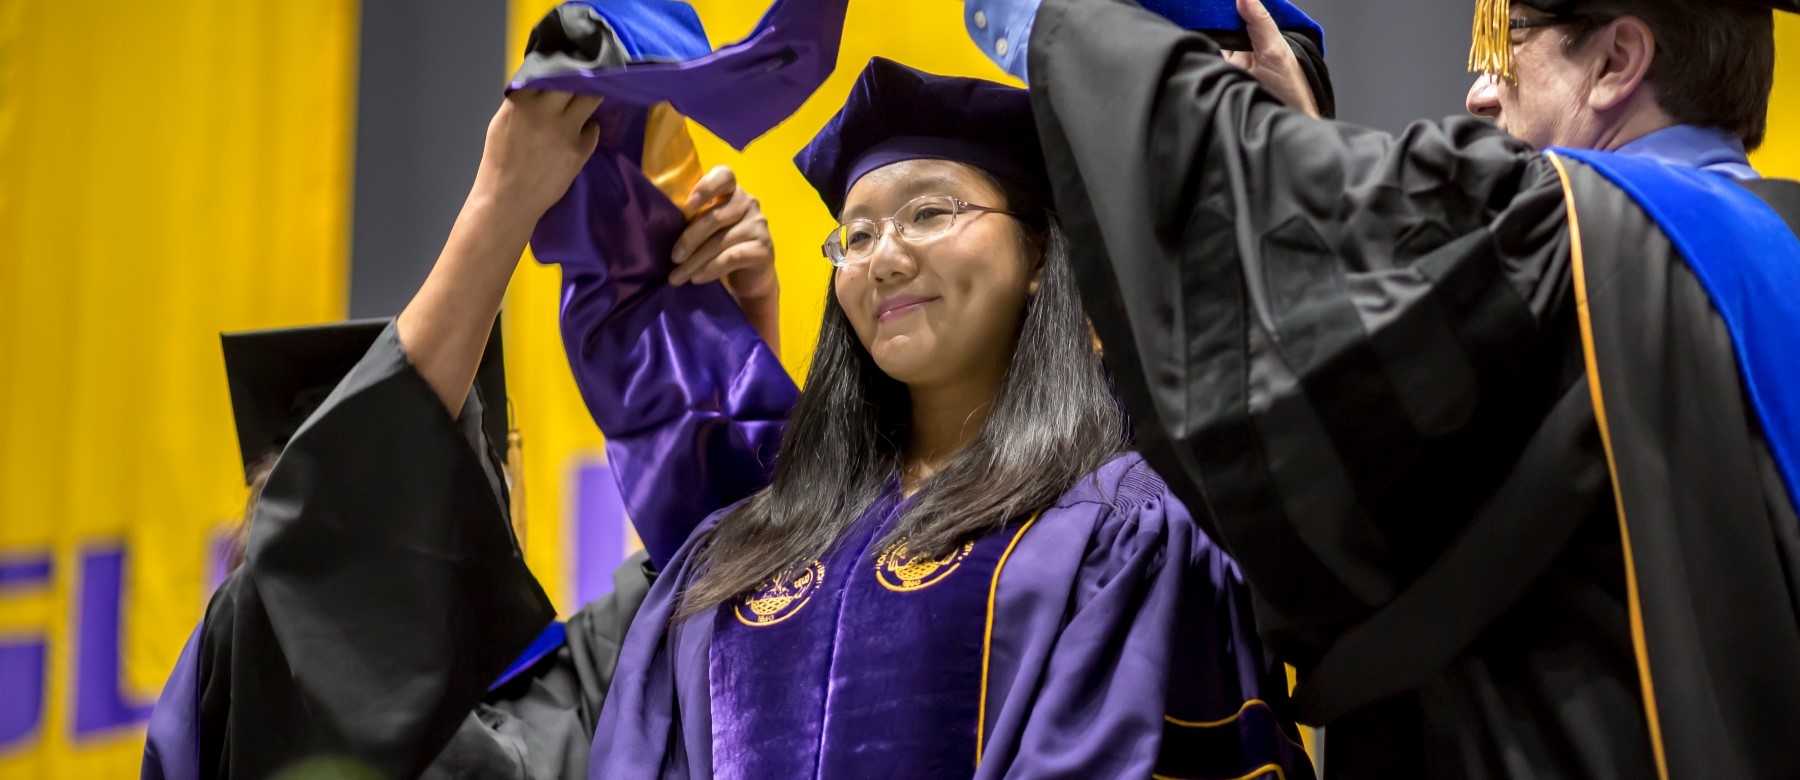 student smiles as two faculty members give her graduation regalia